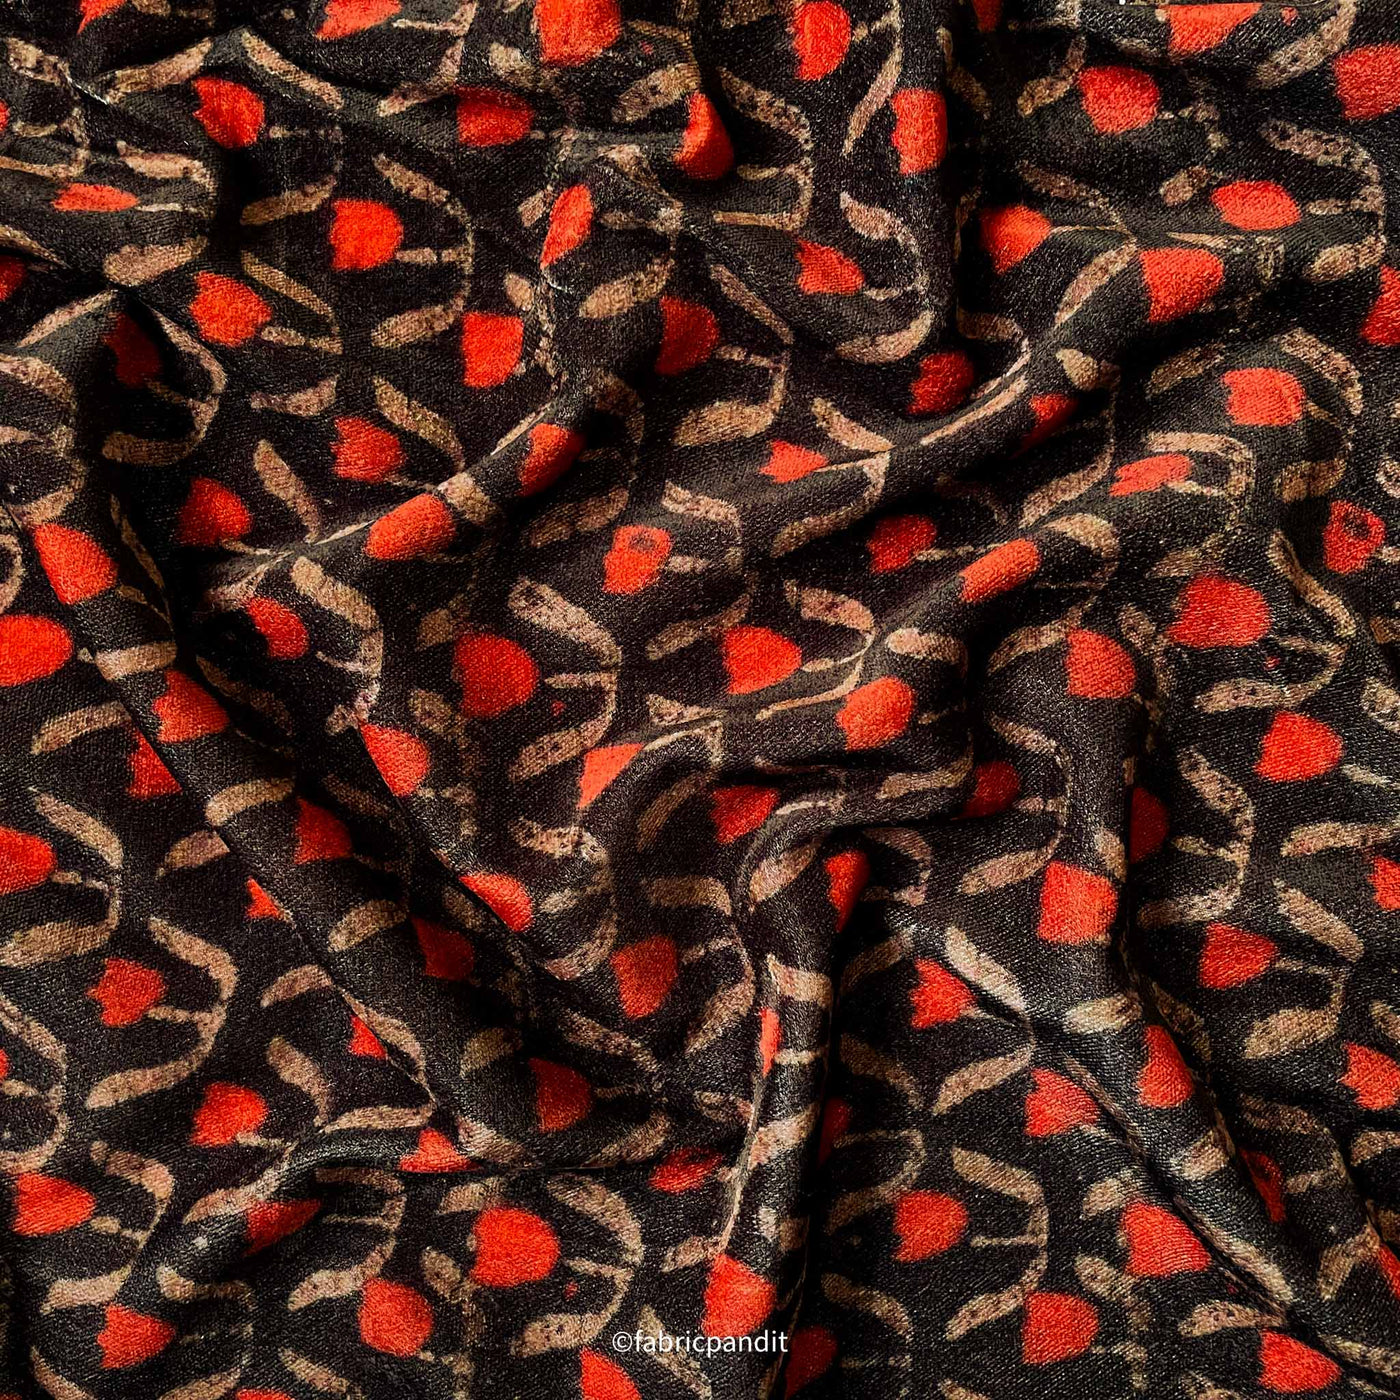 Printed Velvet Fabric Cut Piece (CUT PIECE) Black and Red Tulips All Over Digital Print Pure Velvet Fabric (Width 44 Inches)